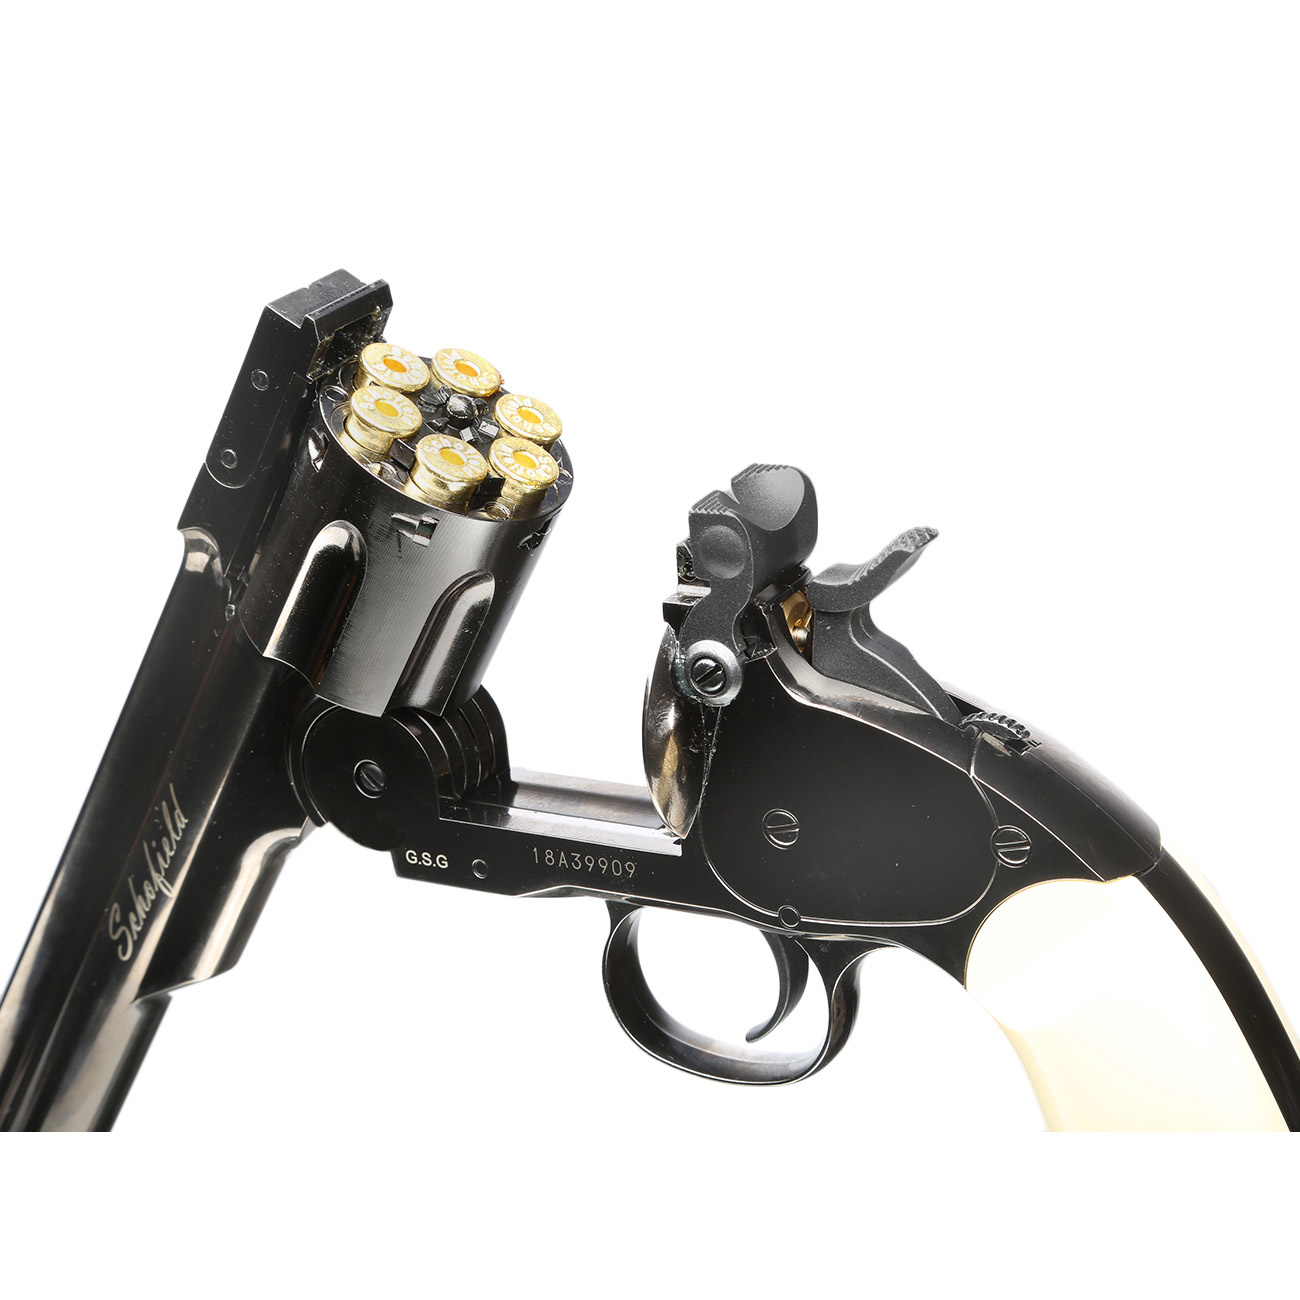 ASG 6 inch Schofield 1877 Co2 revolver cal. 4.5mm (.177) BB 2.9 Joule - GR